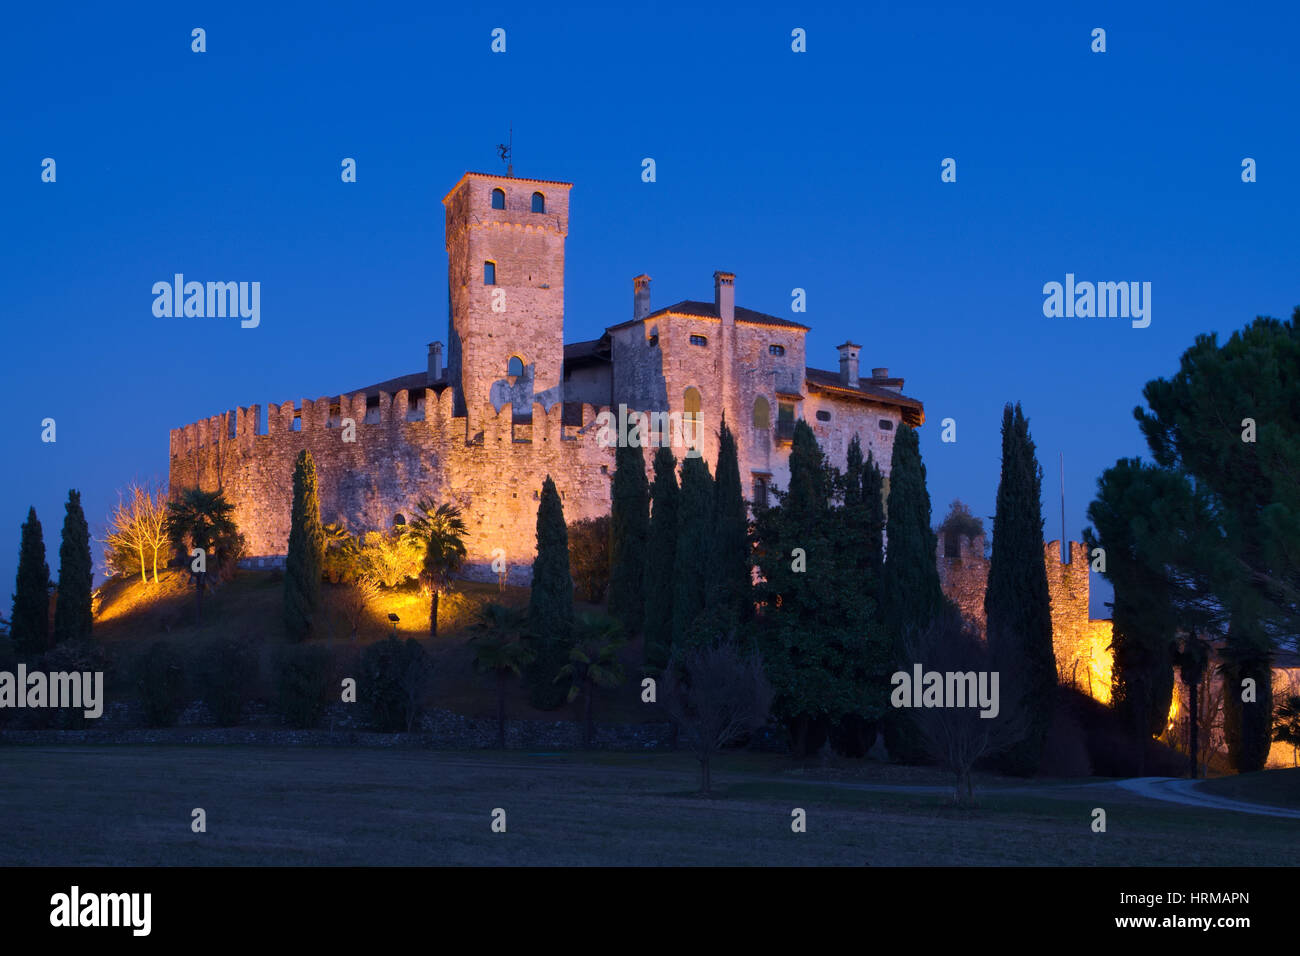 Castle of Villalta, Fagagna, Friuli, Italy, at the bluehour after the sunset Stock Photo